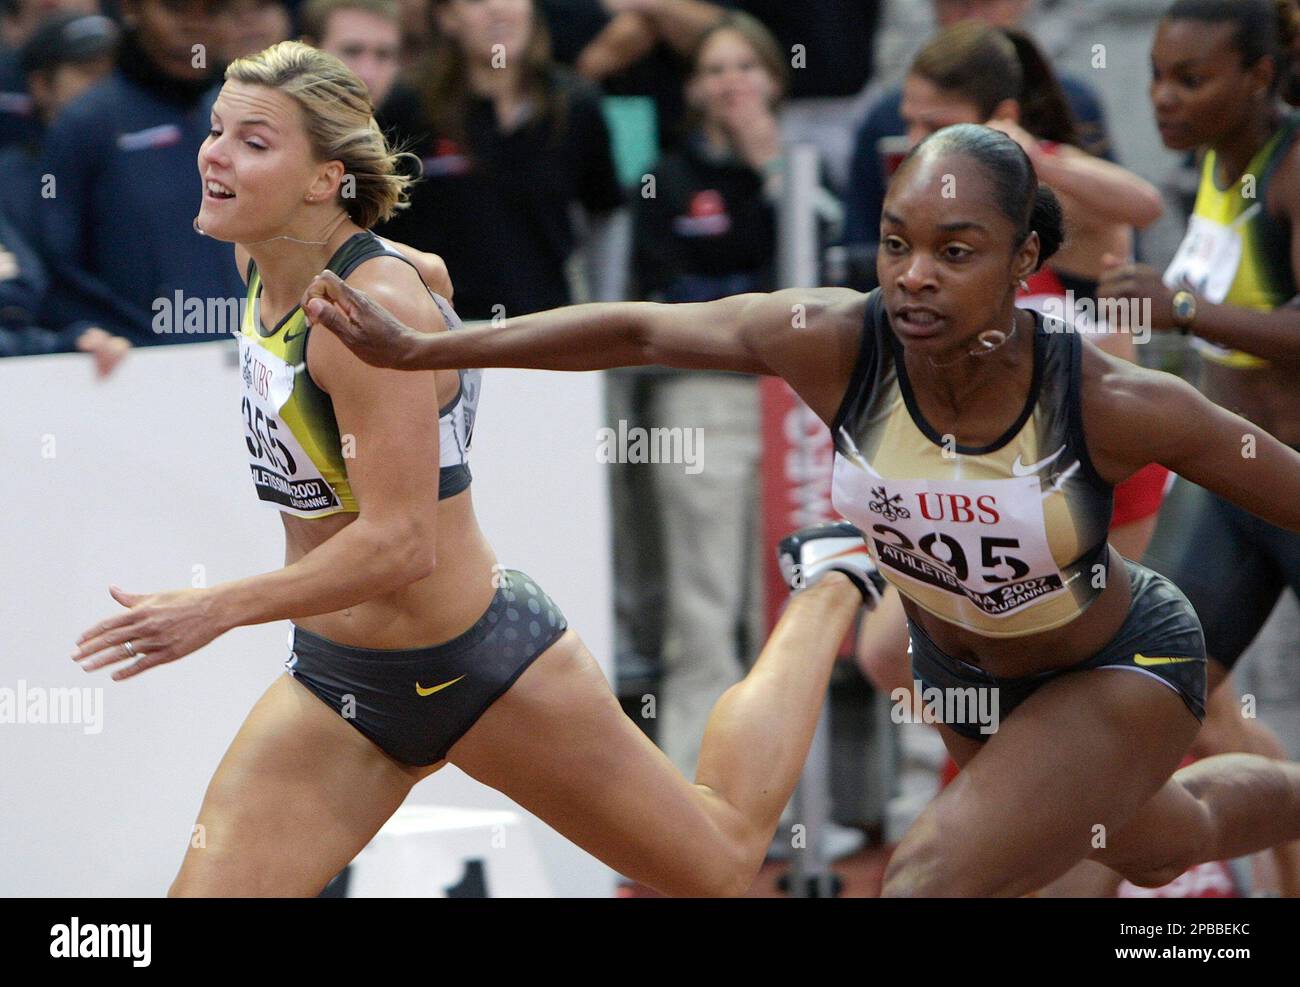 Michelle Perry, right, from the USA wins the women's 100 meters hurdles  race within 12.60 seconds ahead of second placed Susanna Kallur, left, from  Sweden at the Athletissima international athletics meeting in